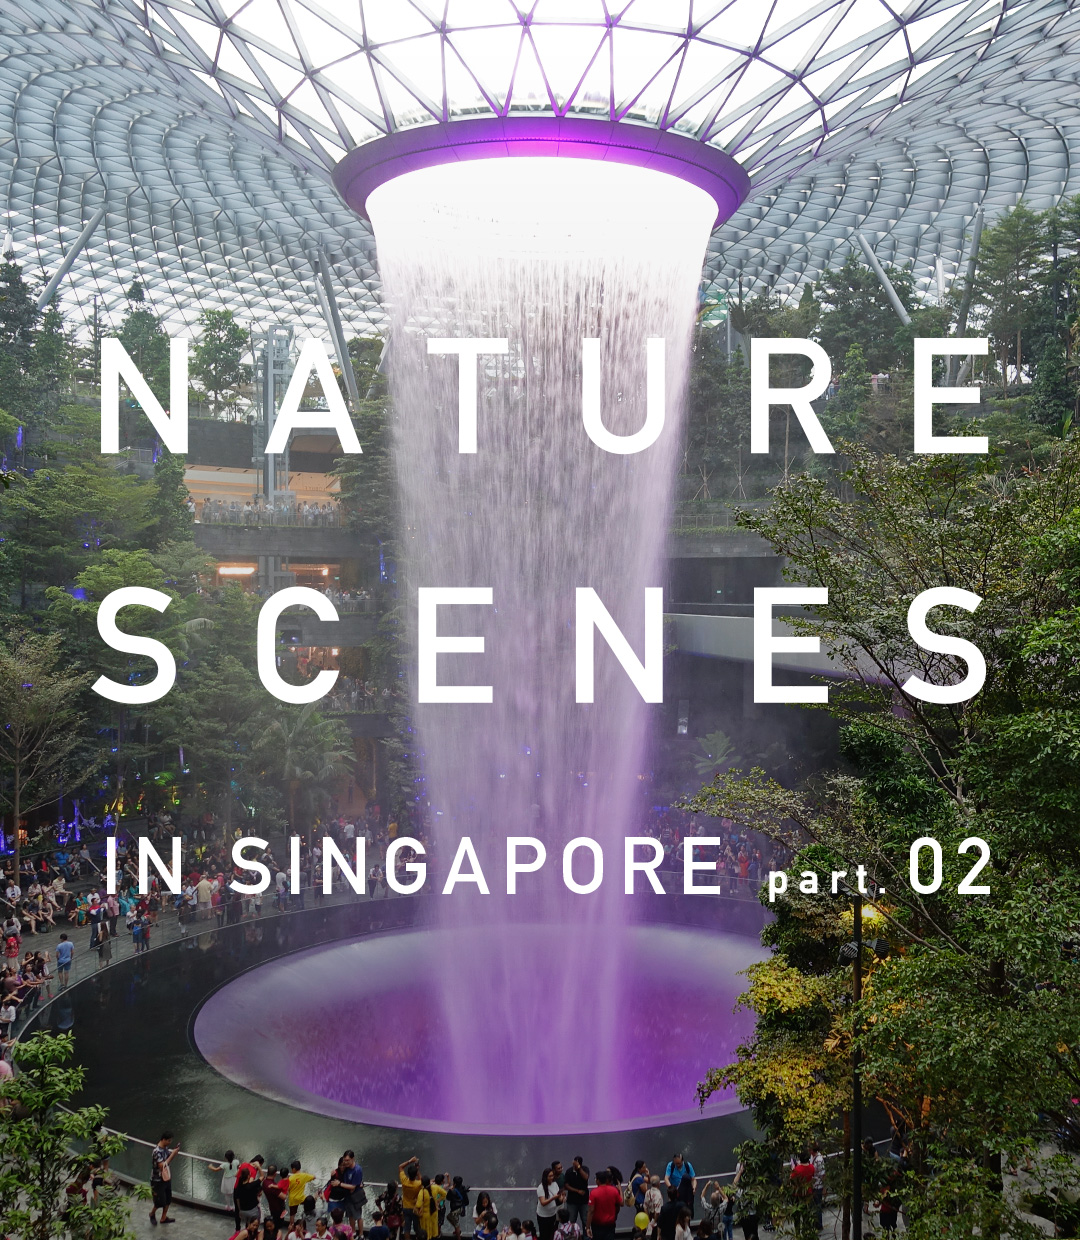 Aquatic plant affairs in the world’s greenest city, Singapore – Extra Edition –